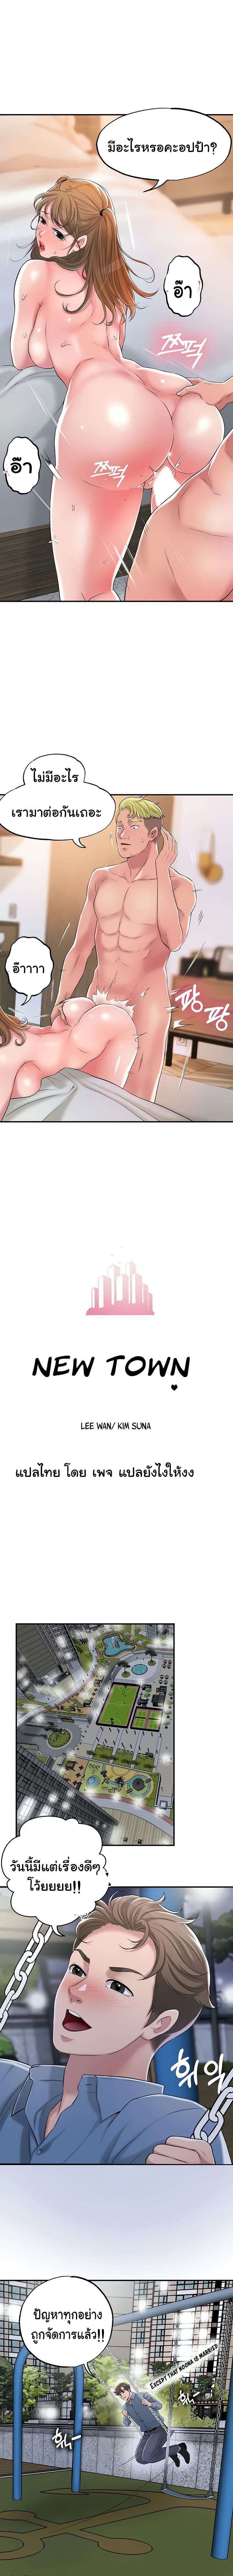 new town